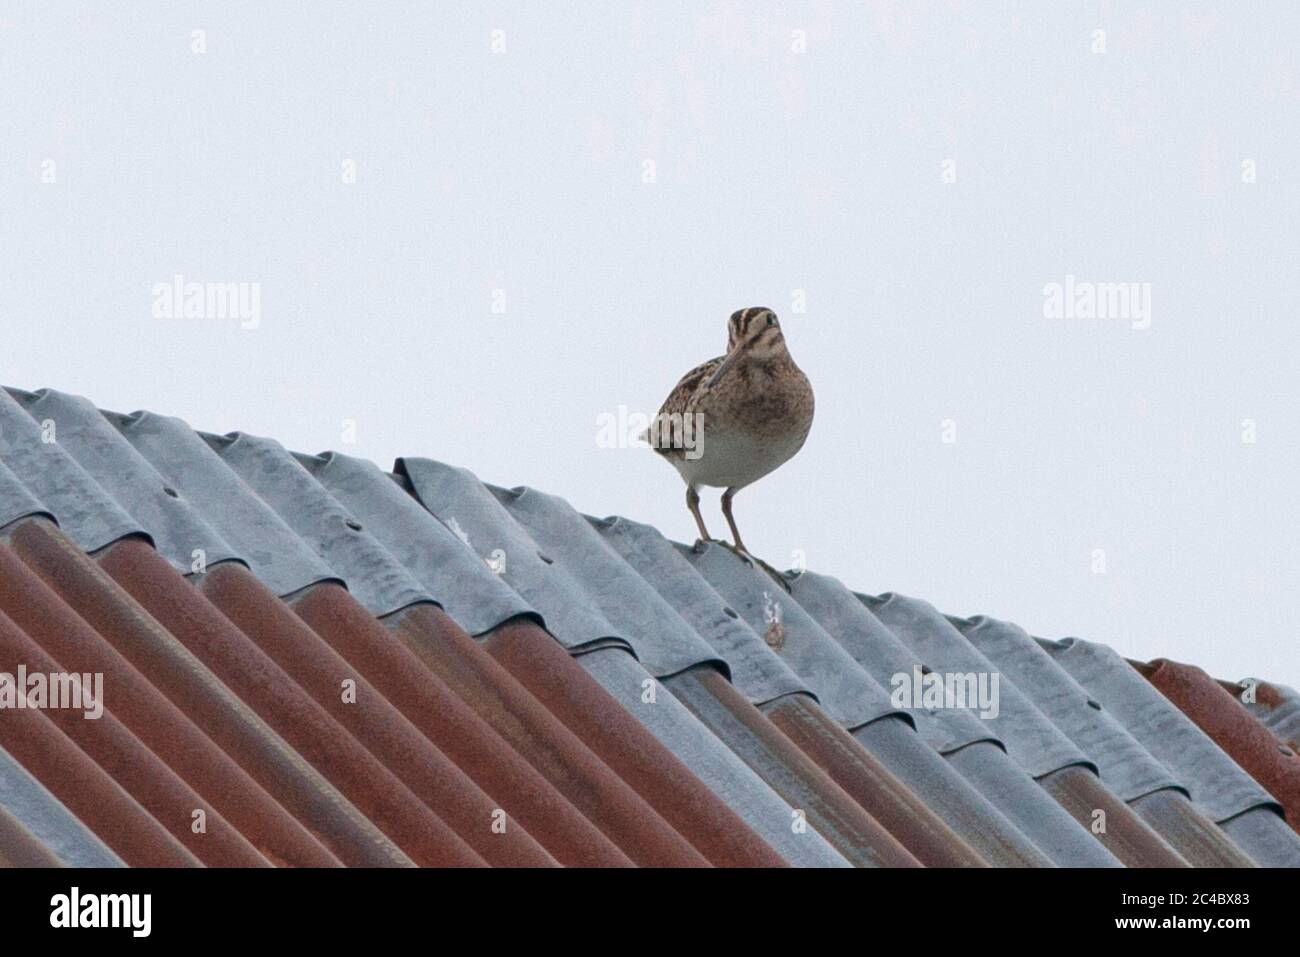 swinhoe's snipe (Gallinago megala), perching on a corrugated iron roof, front view, Finland, Tohmajarvi, Vaertsilae Stock Photo